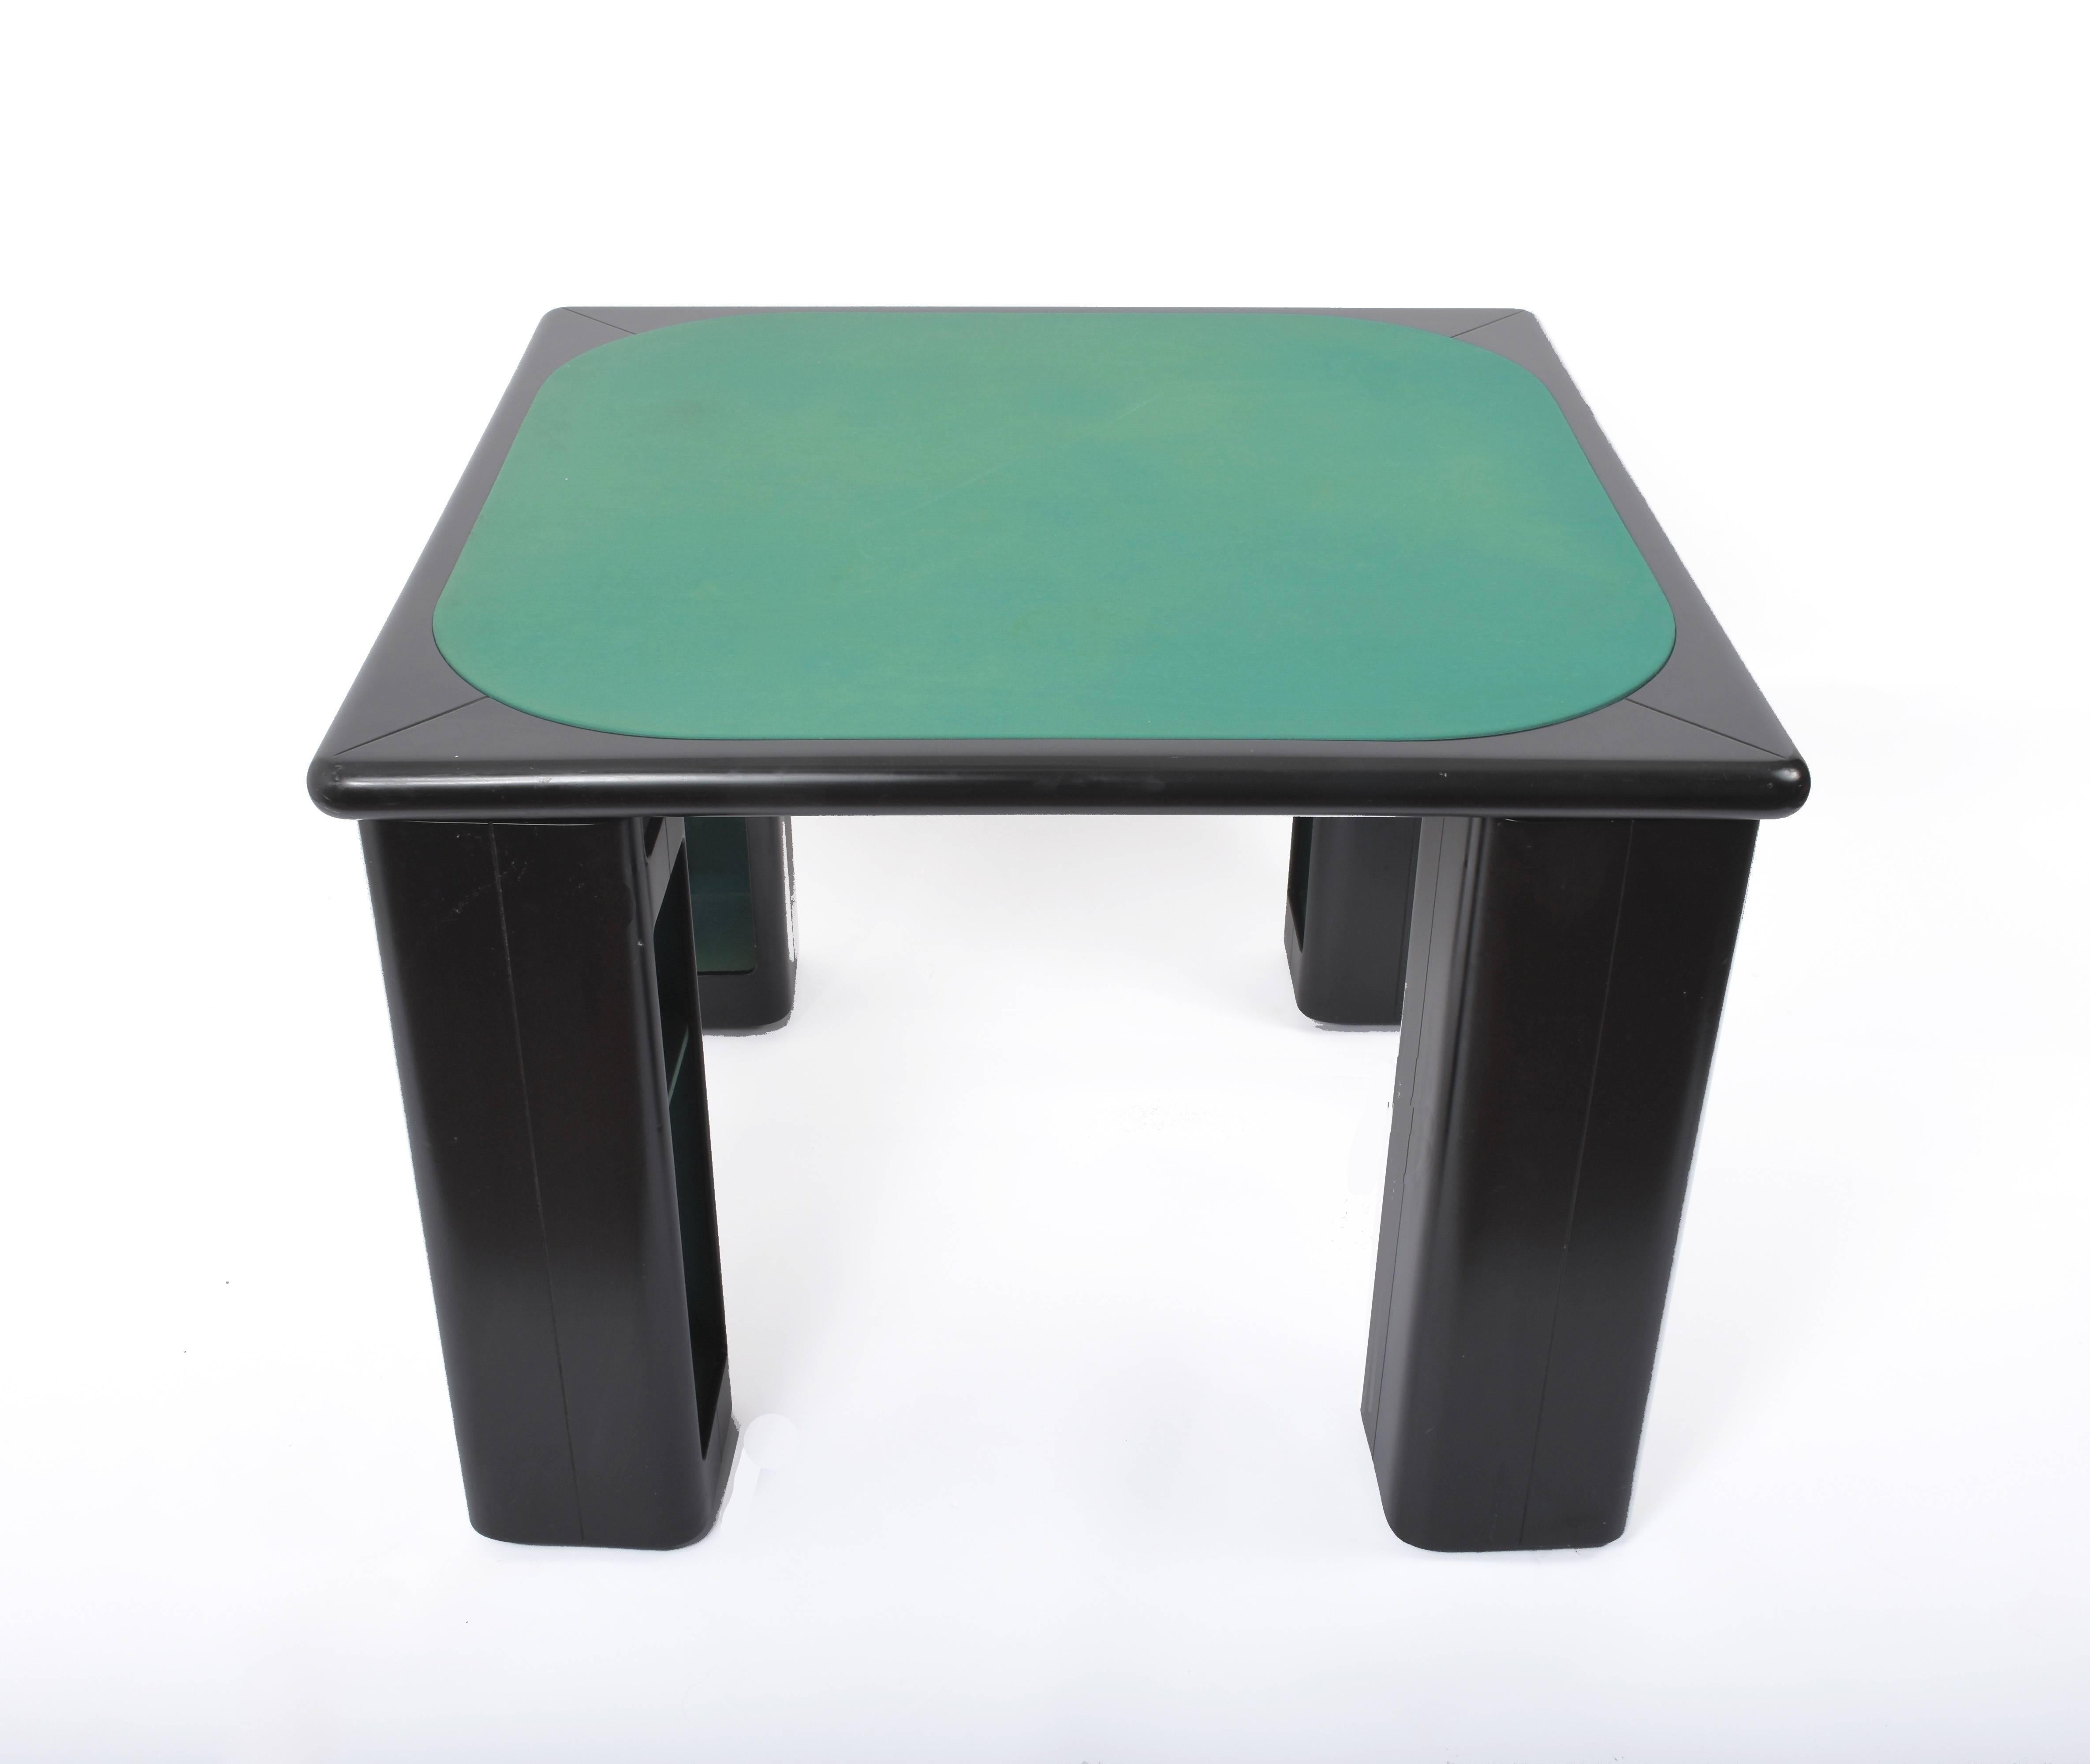 Amazing card or poker table with a structure in black lacquered glossy wood. This fantastic piece was signed by Pierluigi Molinari for Pozzi Milano in Italy during the 1970s.

This piece is unique as it has all four legs can rotate around a chrome